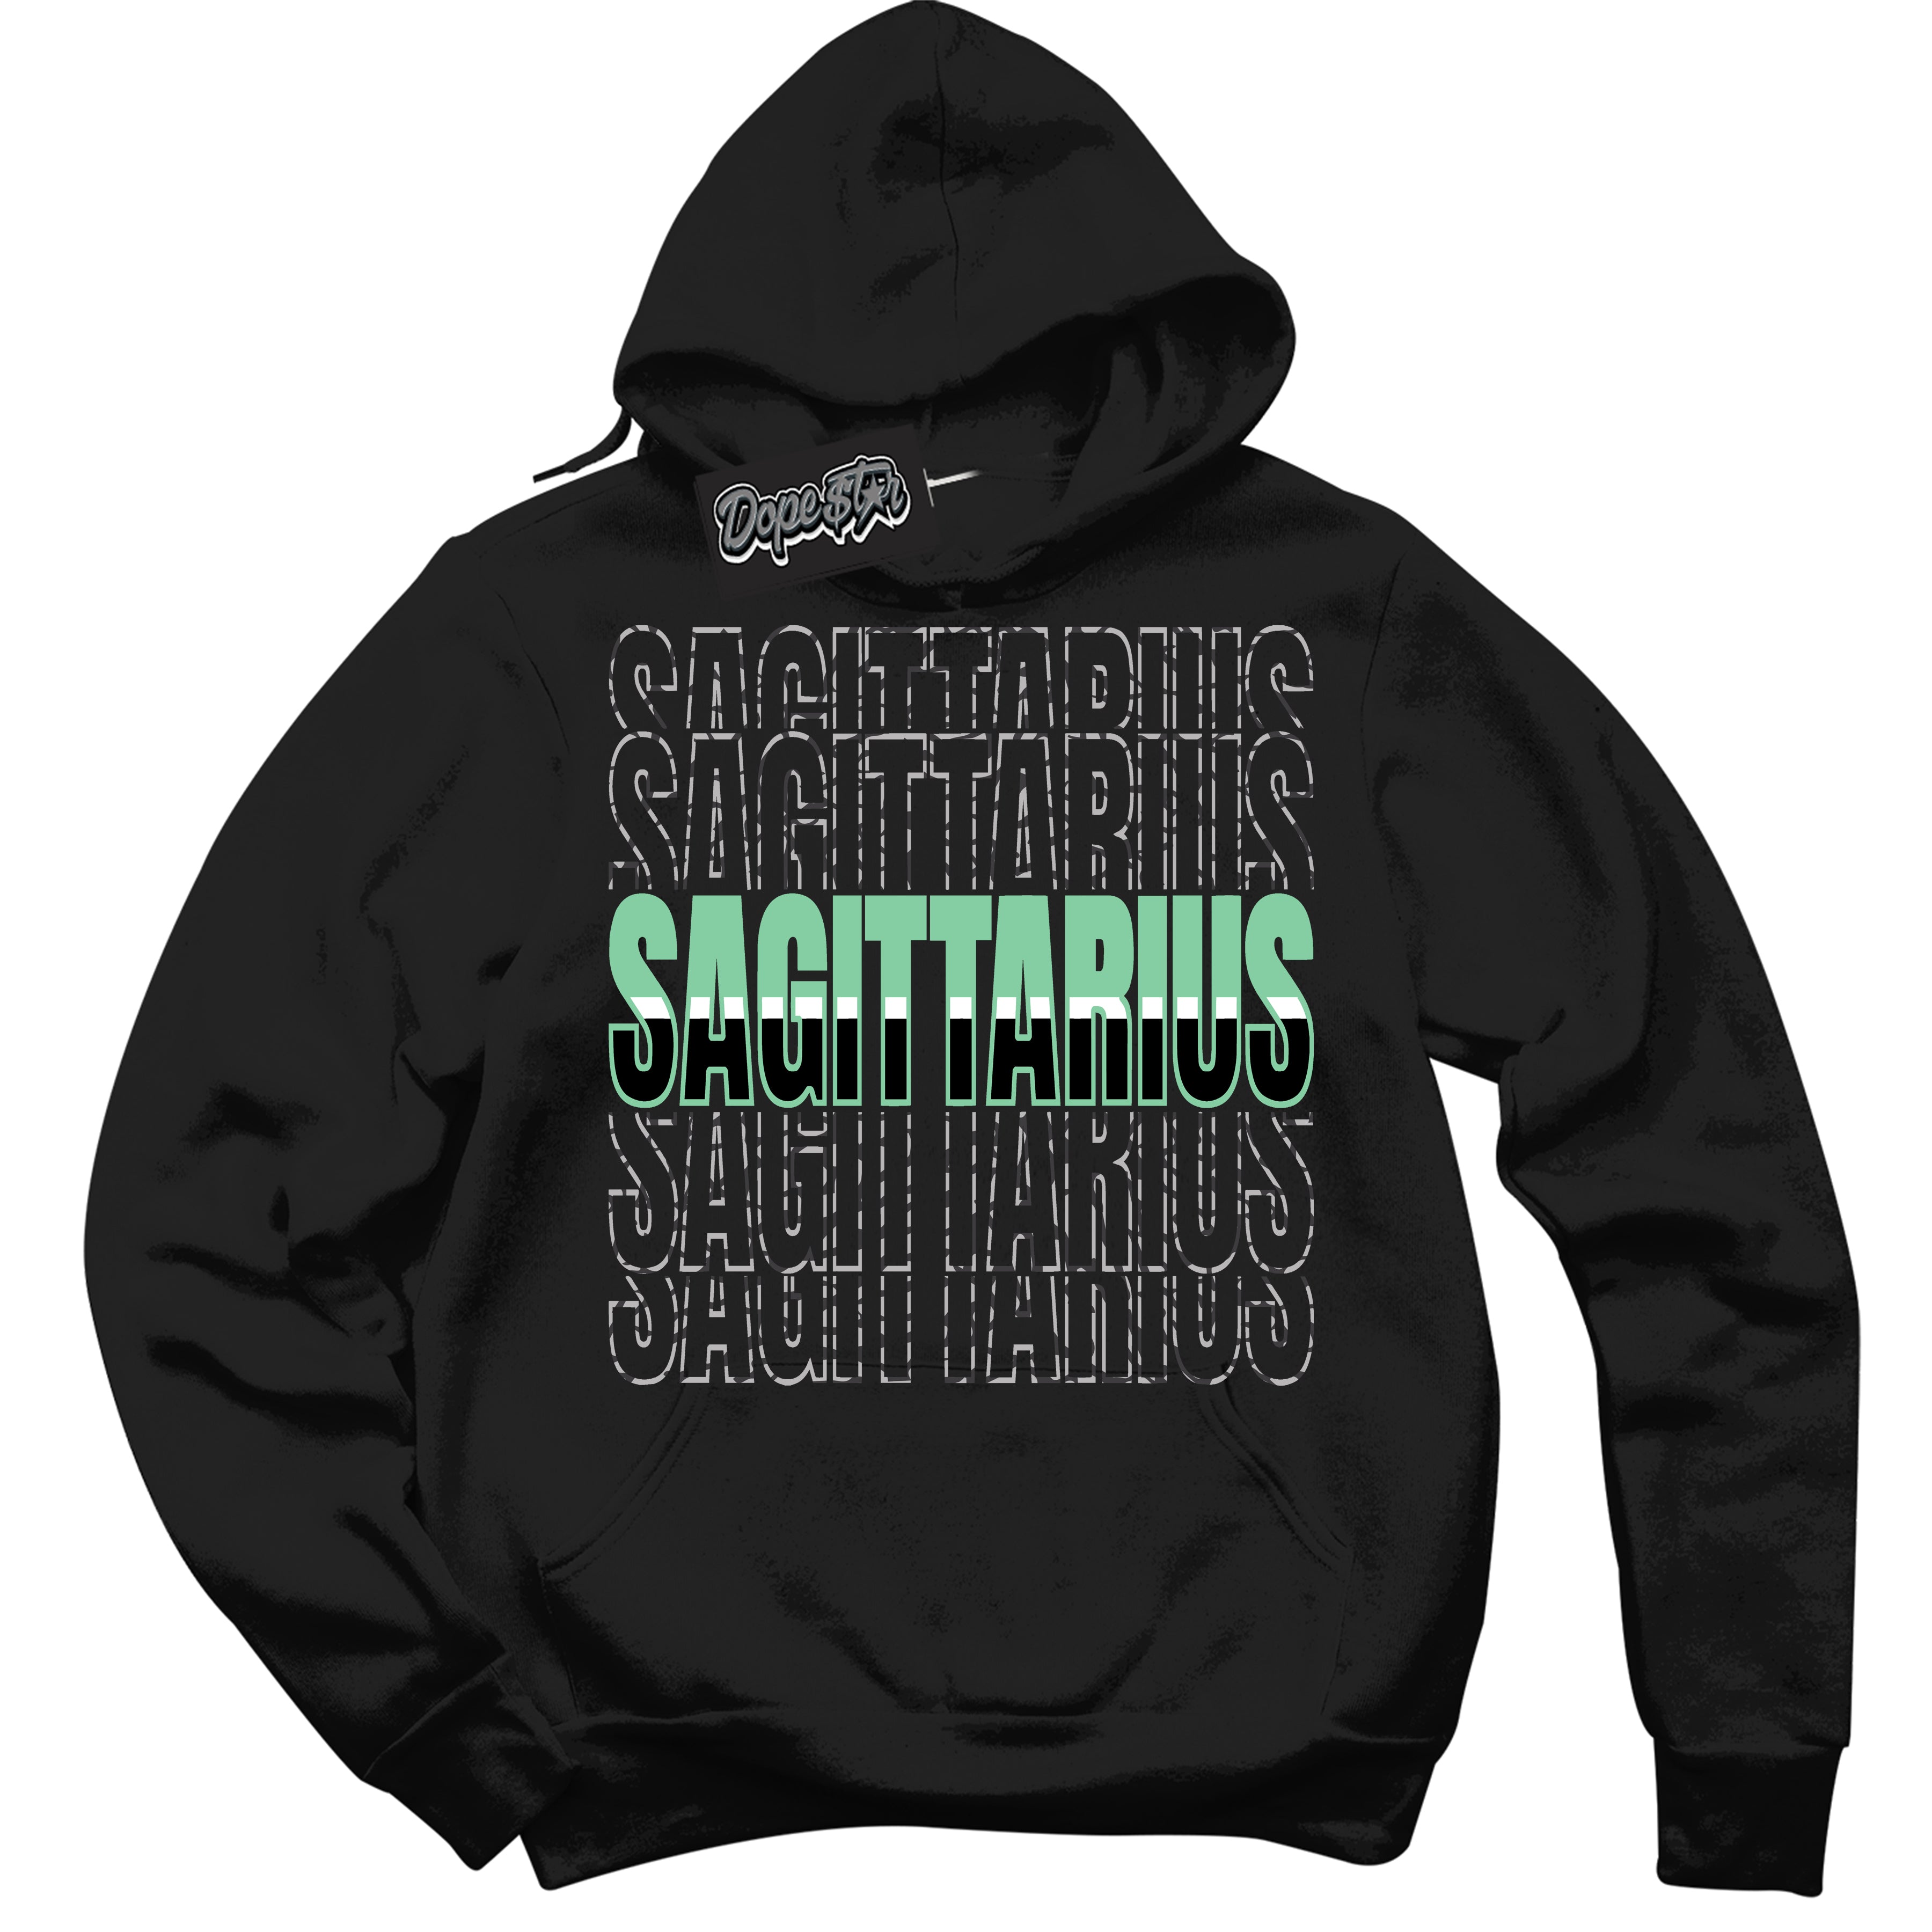 Cool Black Graphic DopeStar Hoodie with “ Sagittarius “ print, that perfectly matches Green Glow 3S sneakers